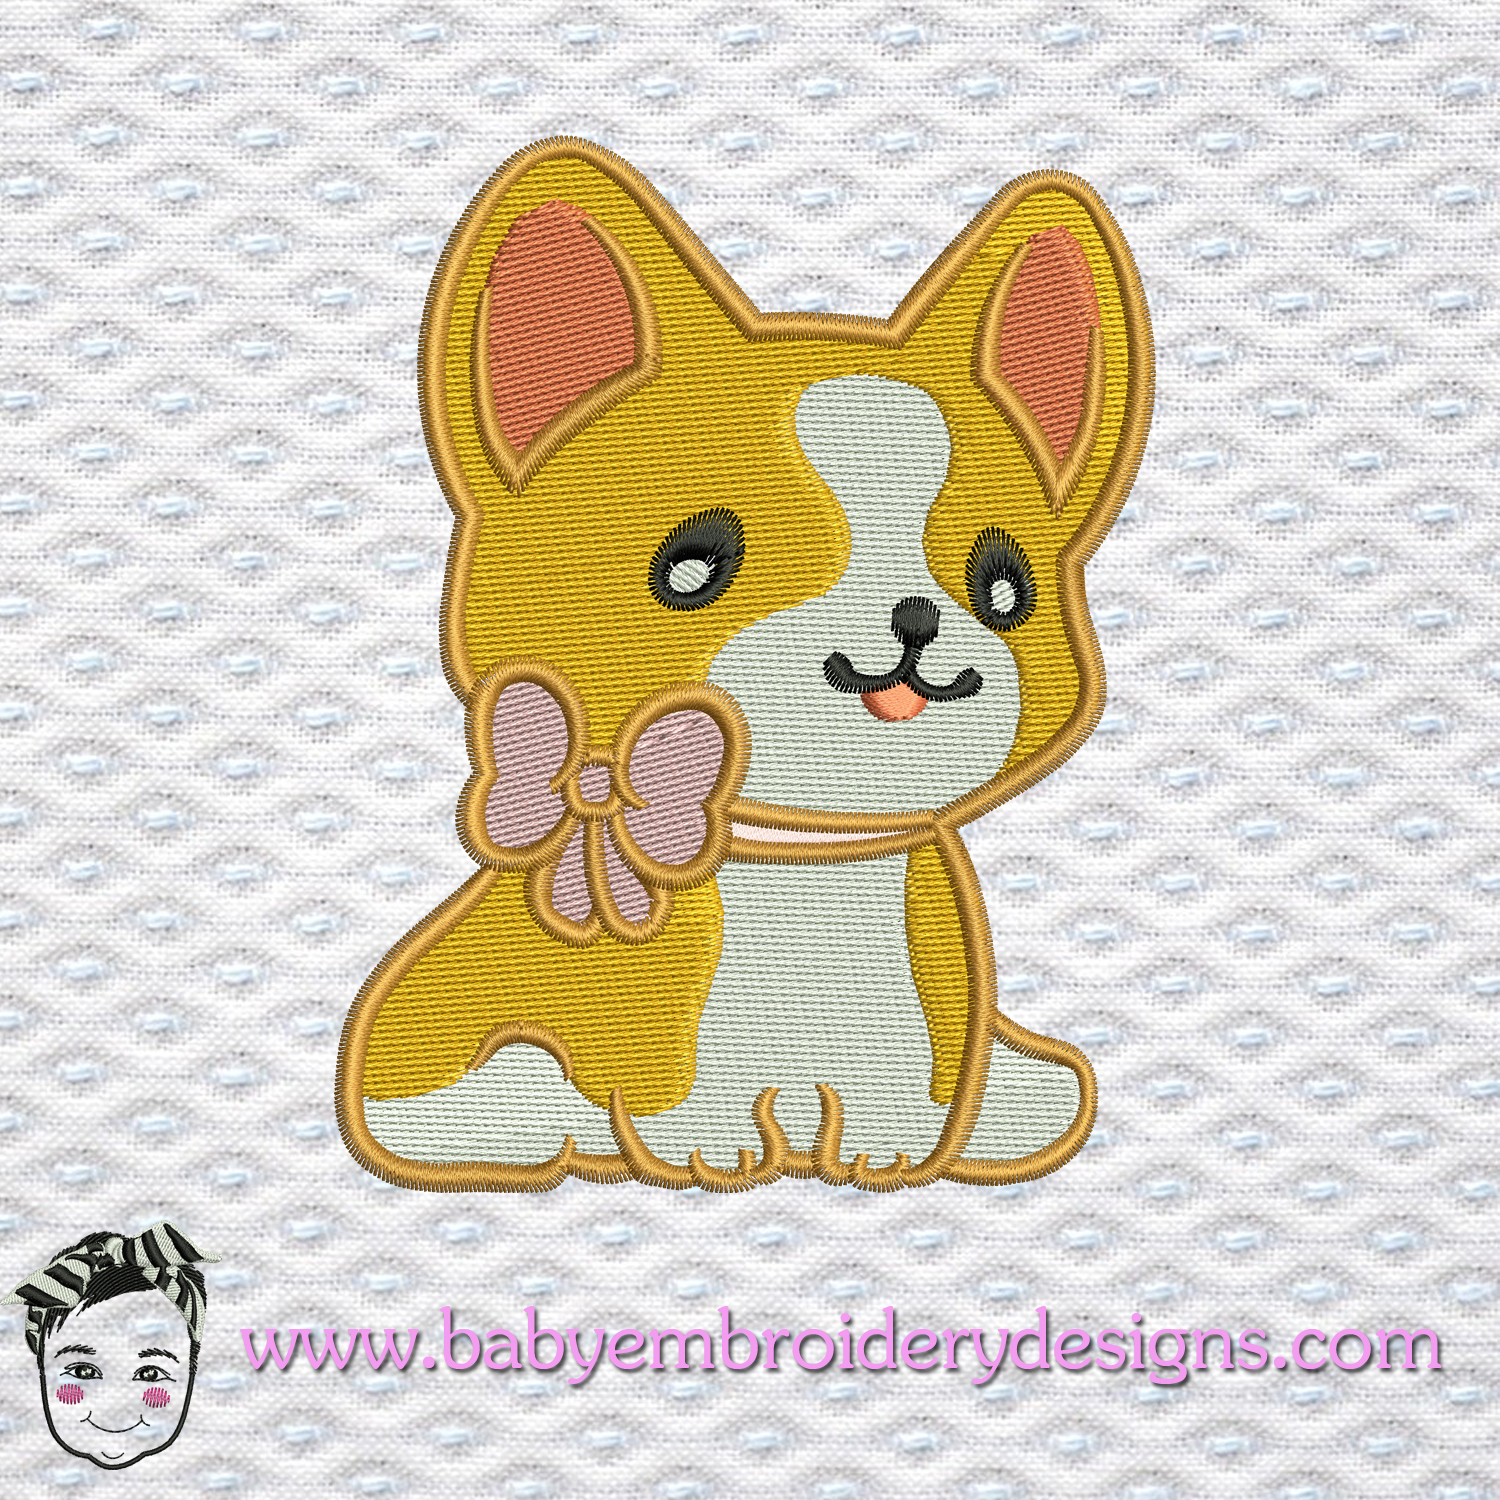 Embroidery Patterns For Sale Embroidery Designs Ba Pembrok Dog Instant Download